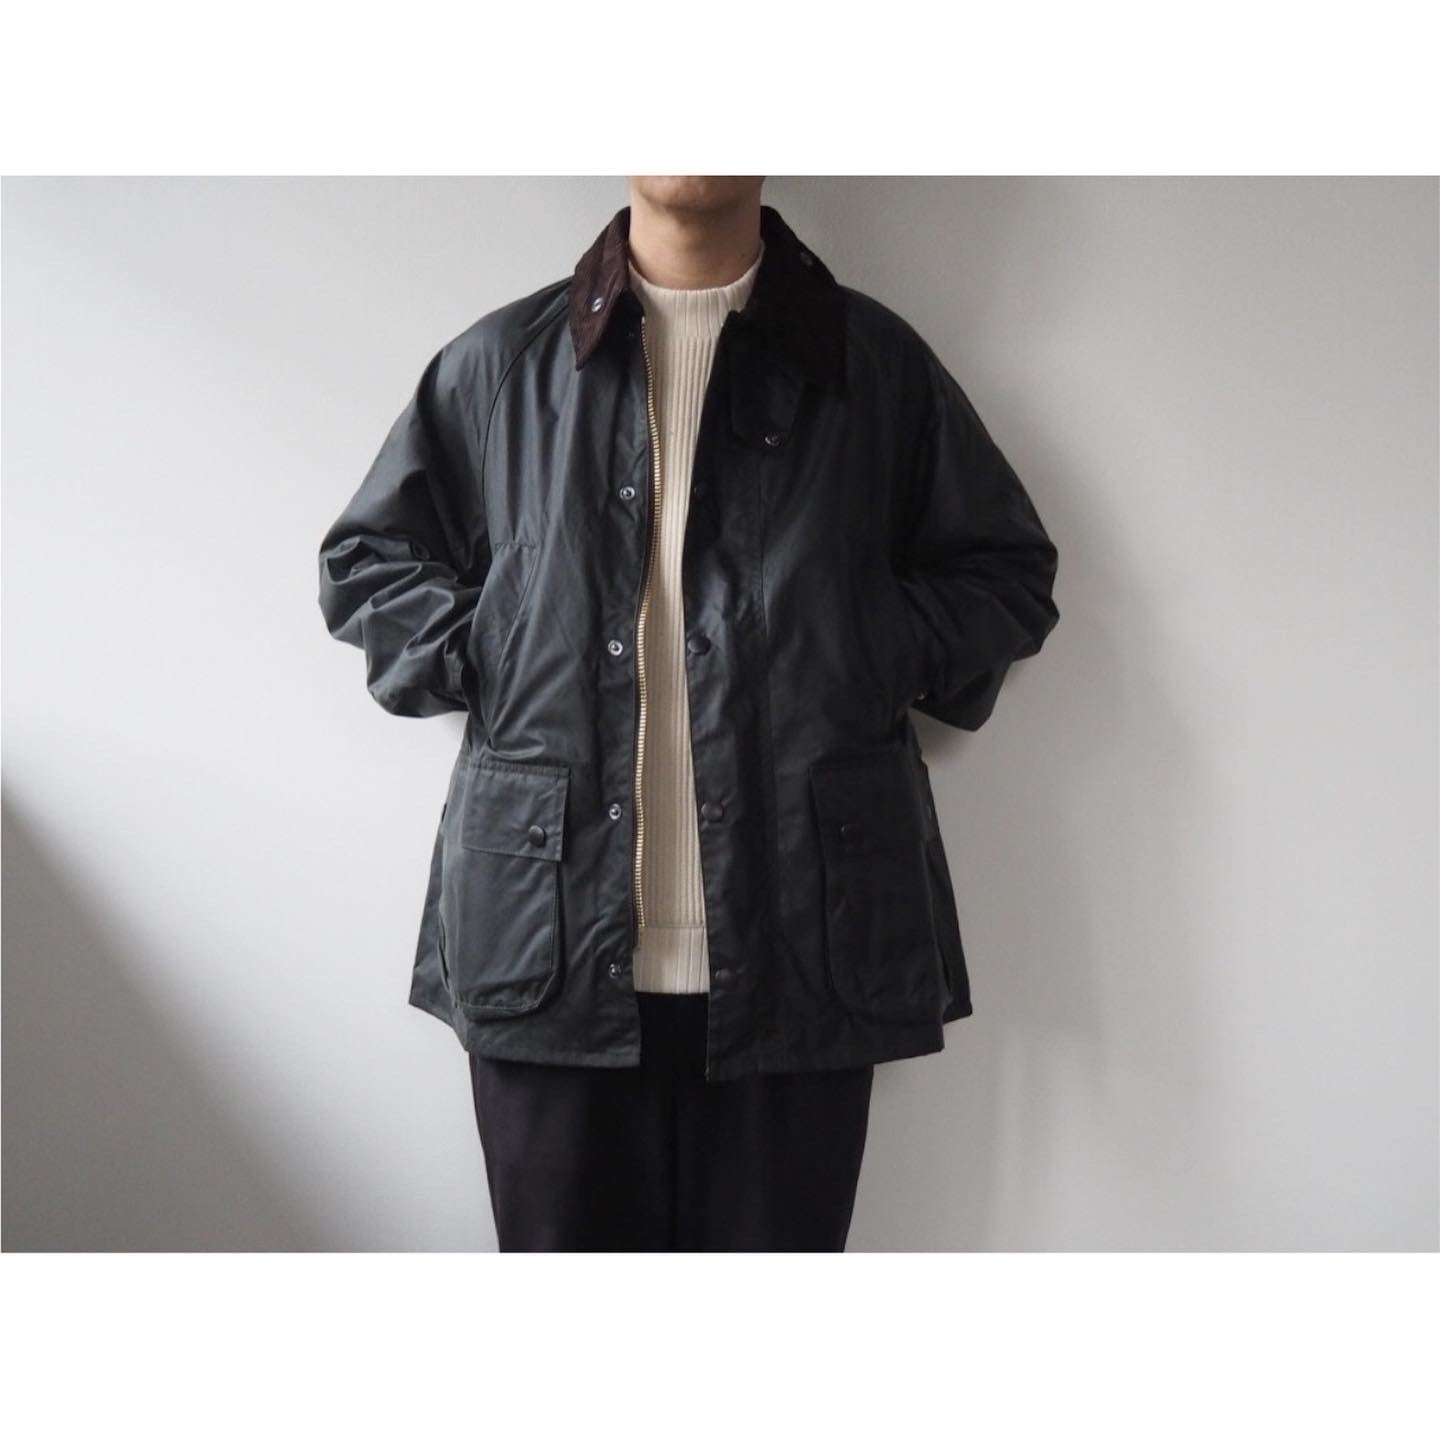 Barbour(バブアー) 『OS WAX BEDALE』Waxed Cotton Jacket | AUTHENTIC